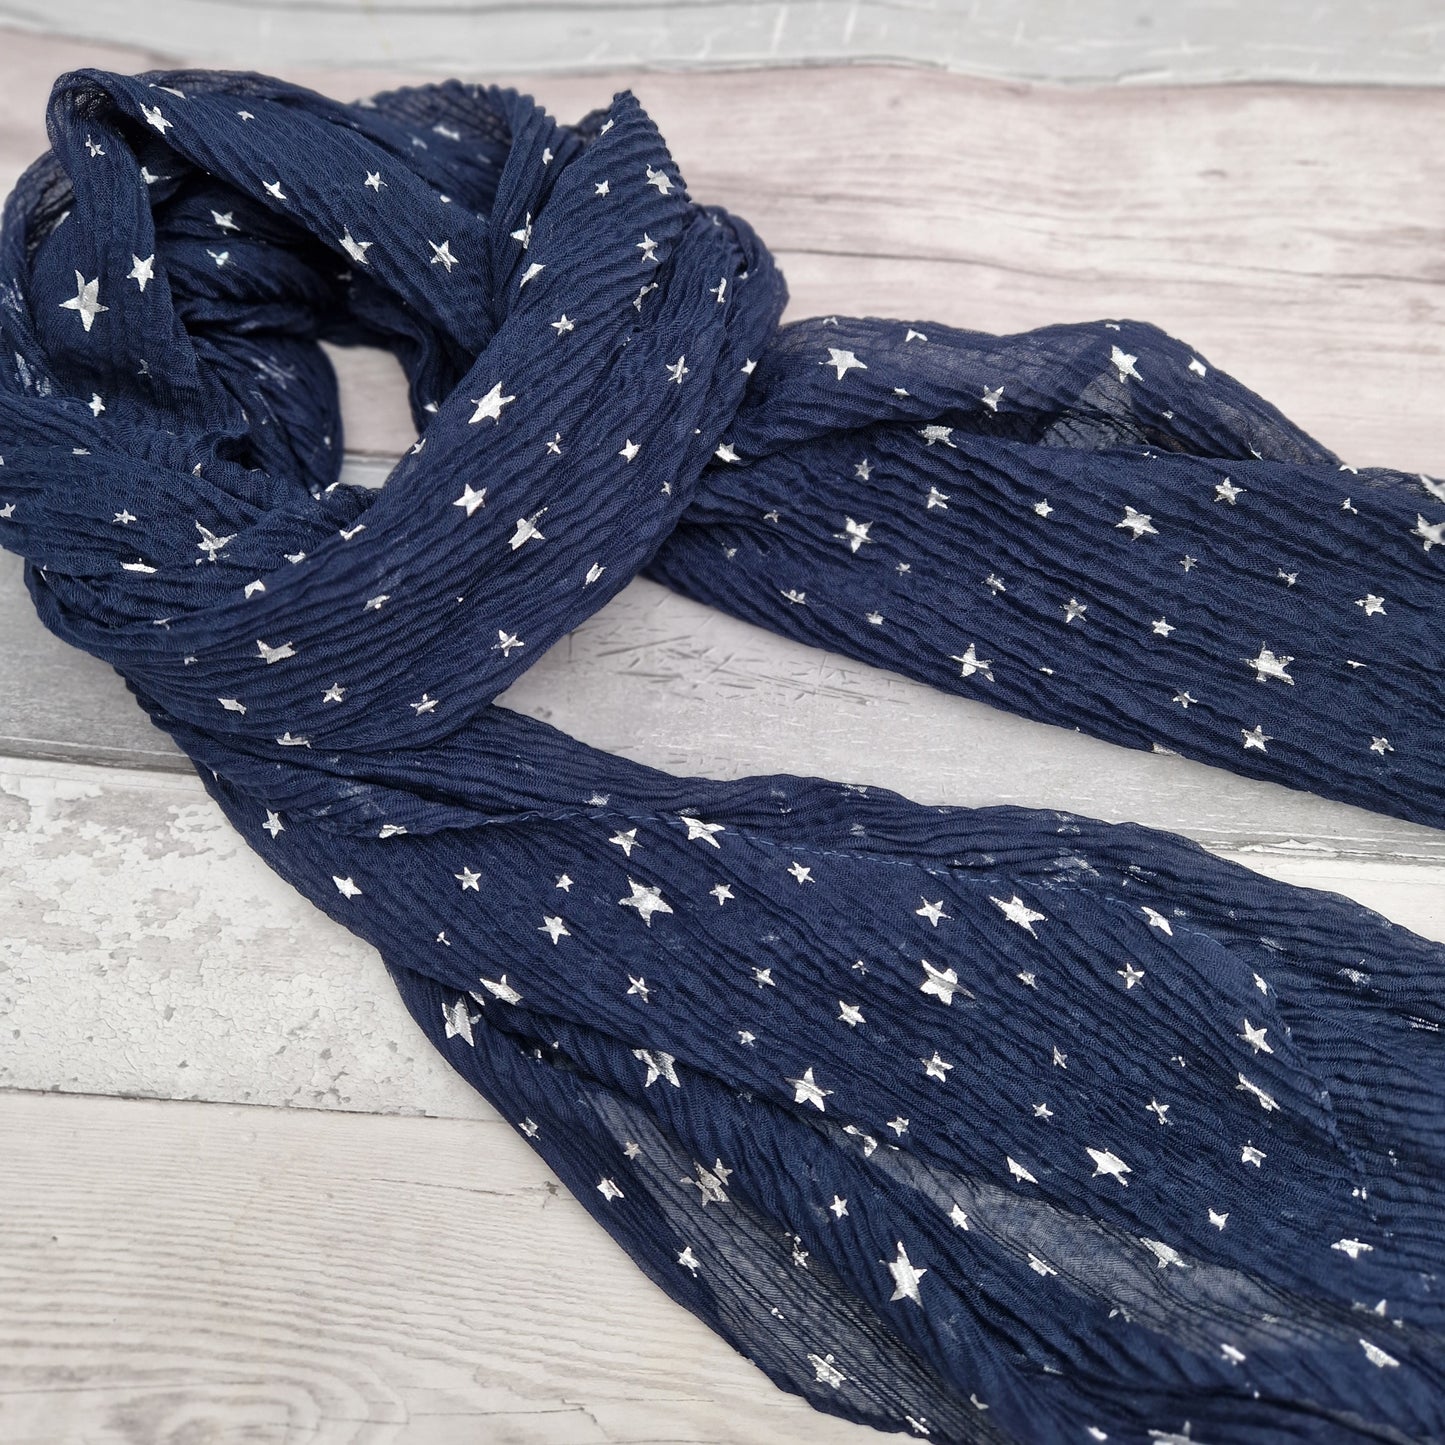 Navy crinkle finish scarf decorated with silver metallic stars.